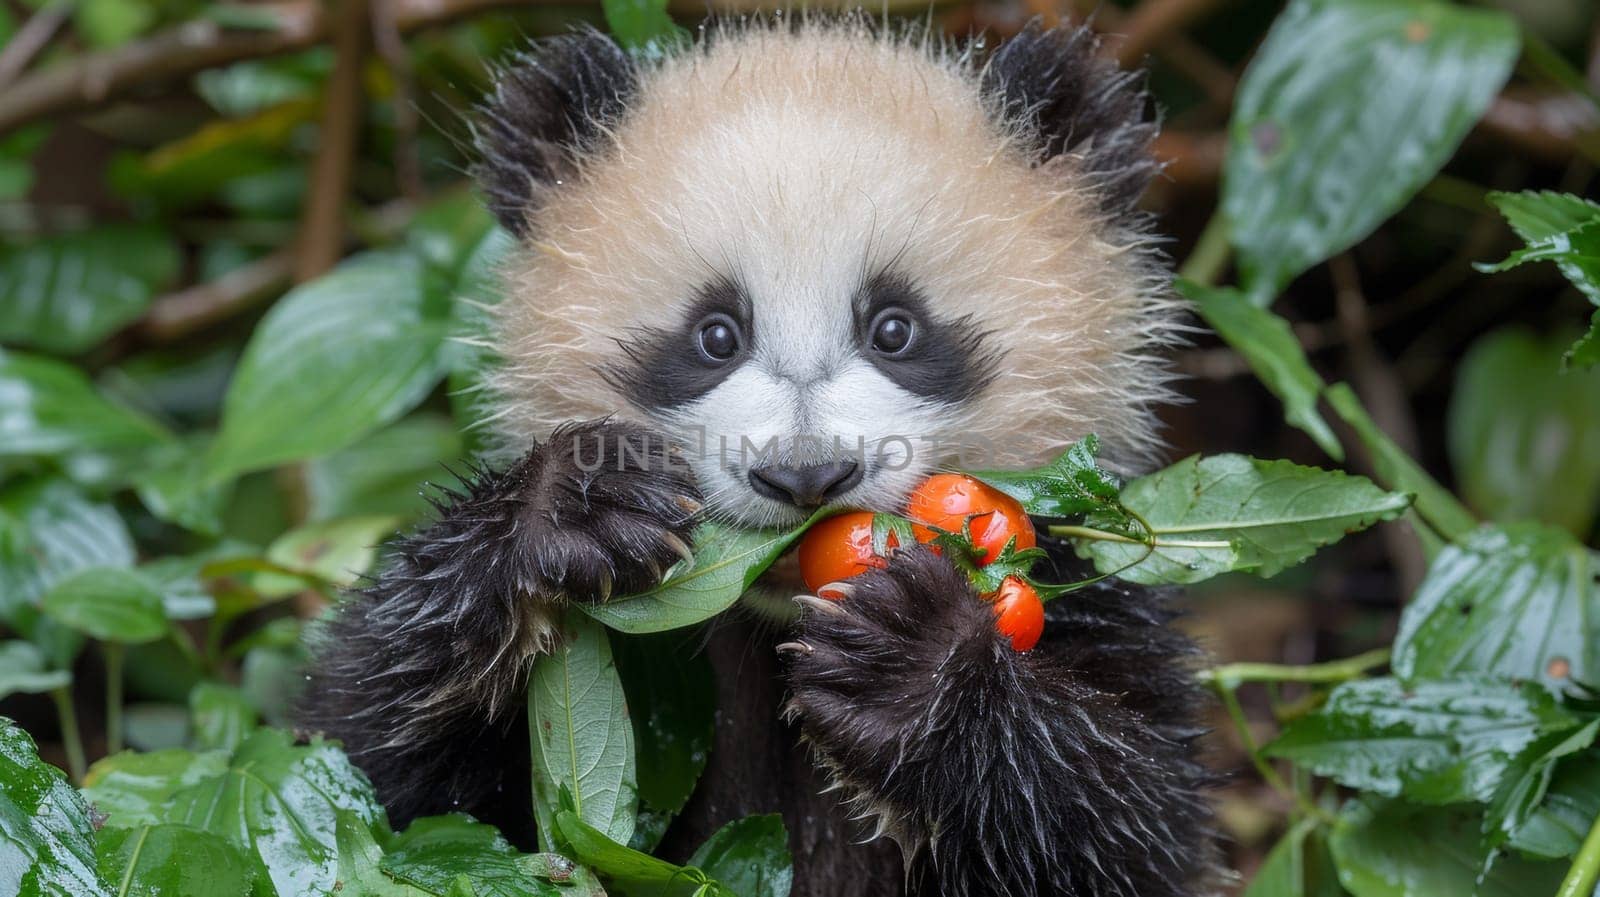 A panda bear eating a tomato in the wild